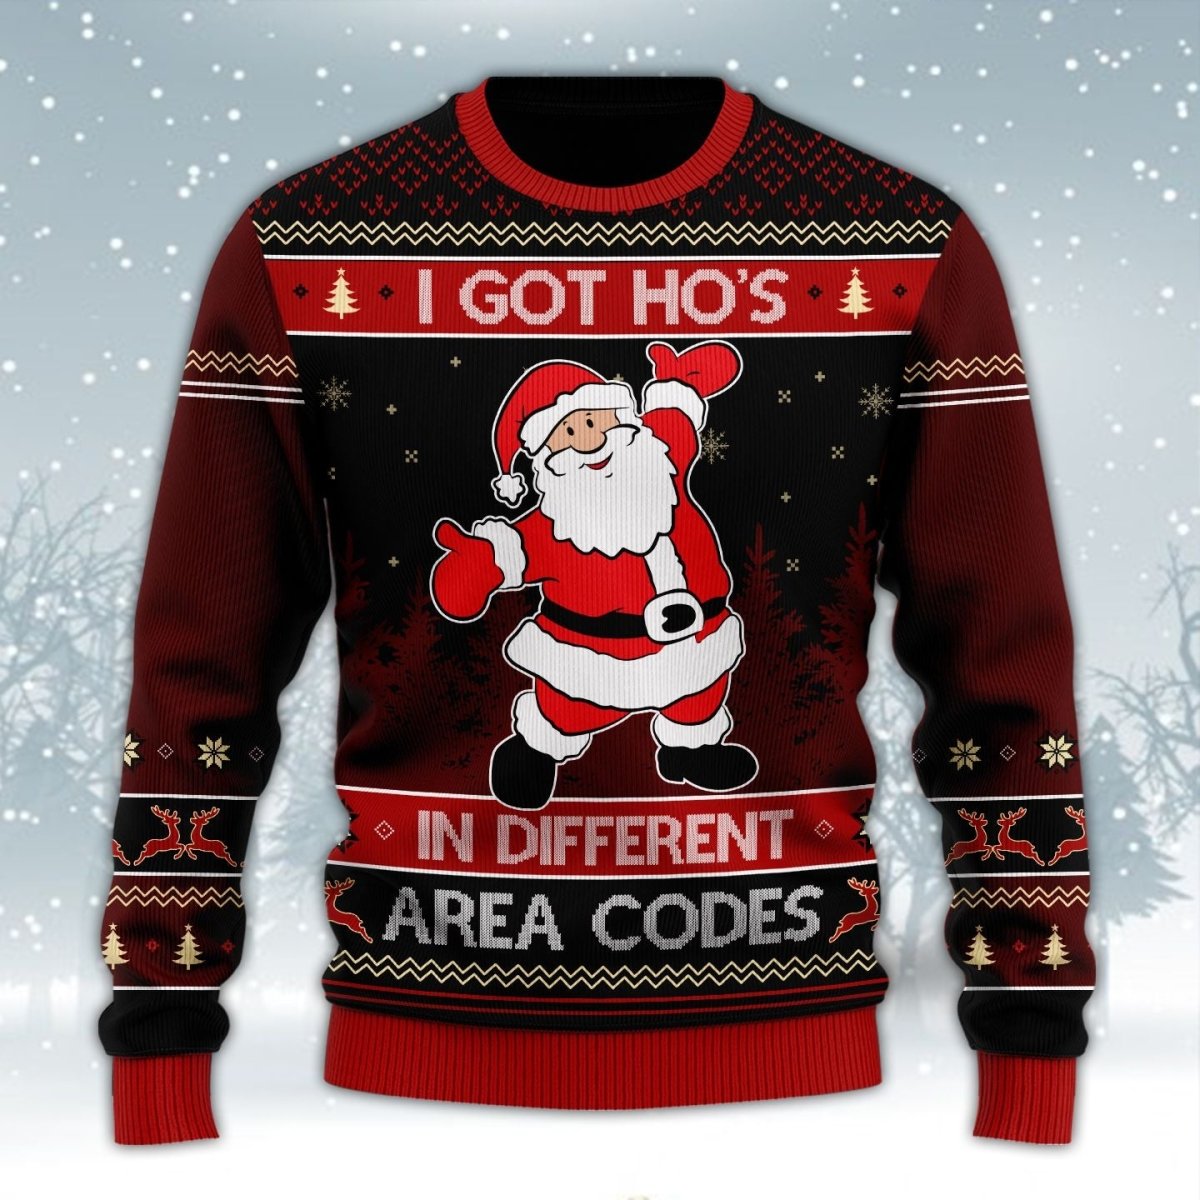 I Got Ho's In Different Area Codes Ugly Sweater - TG0921HN